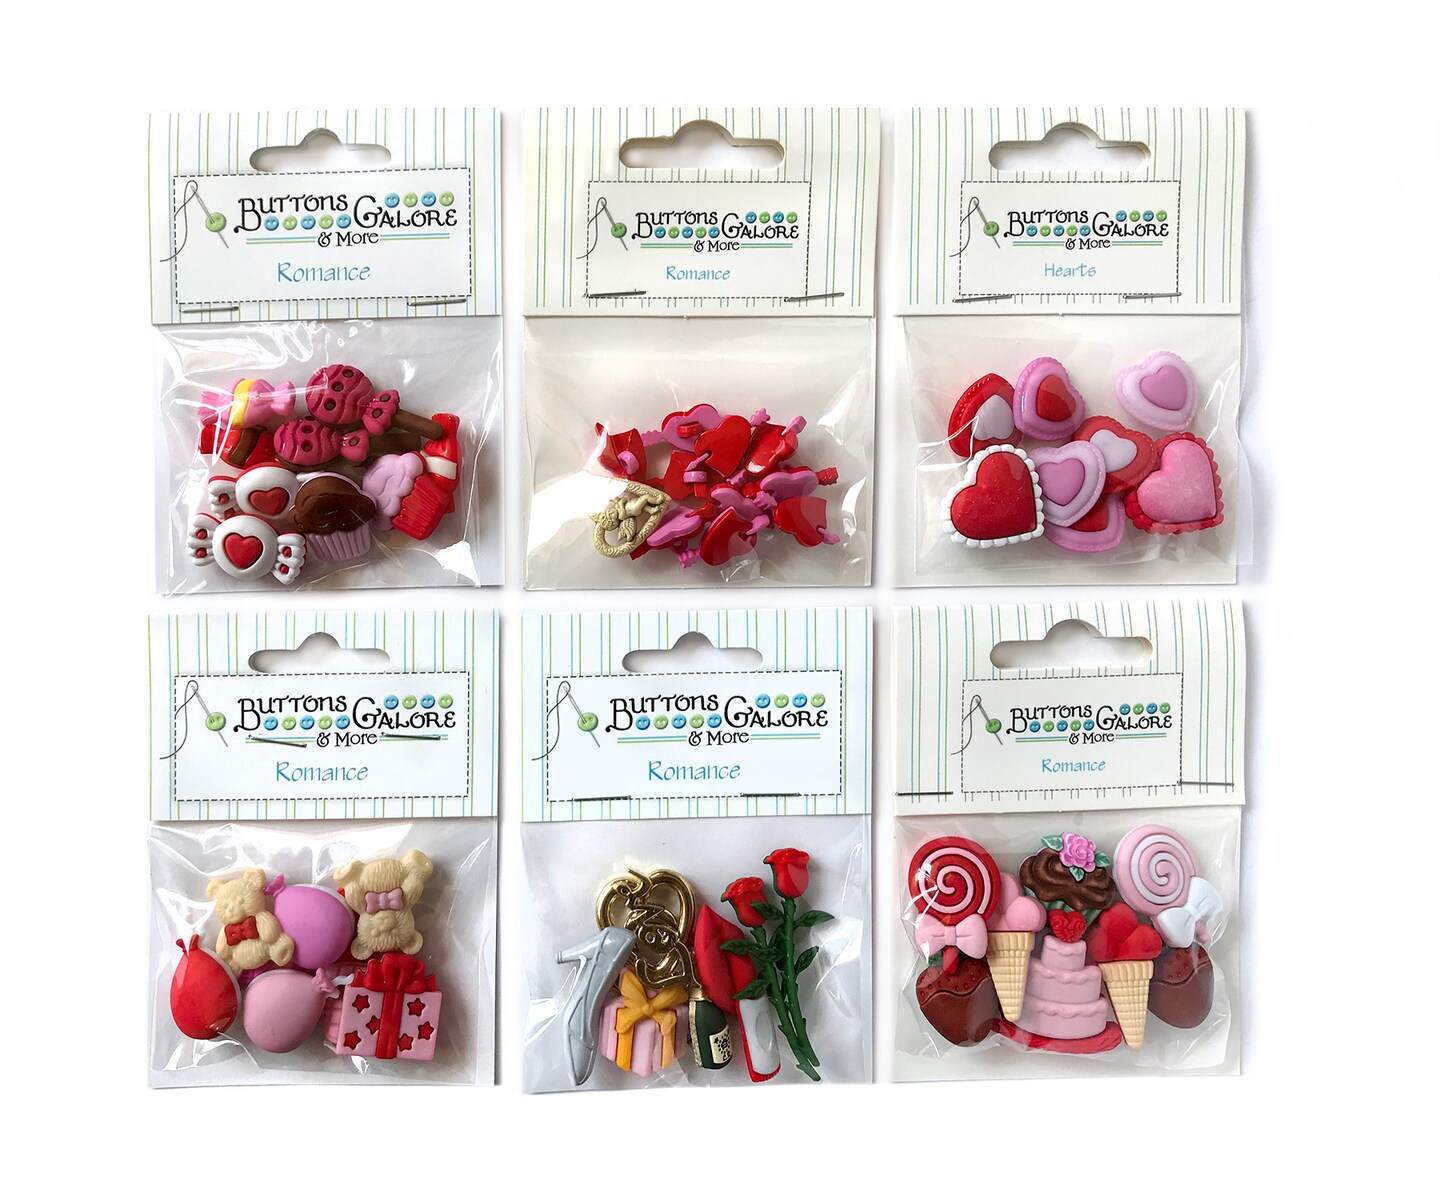 Buttons Galore 60 Romance Button Bundle for Sewing &#x26; Crafts - Set of 6 Button Packs